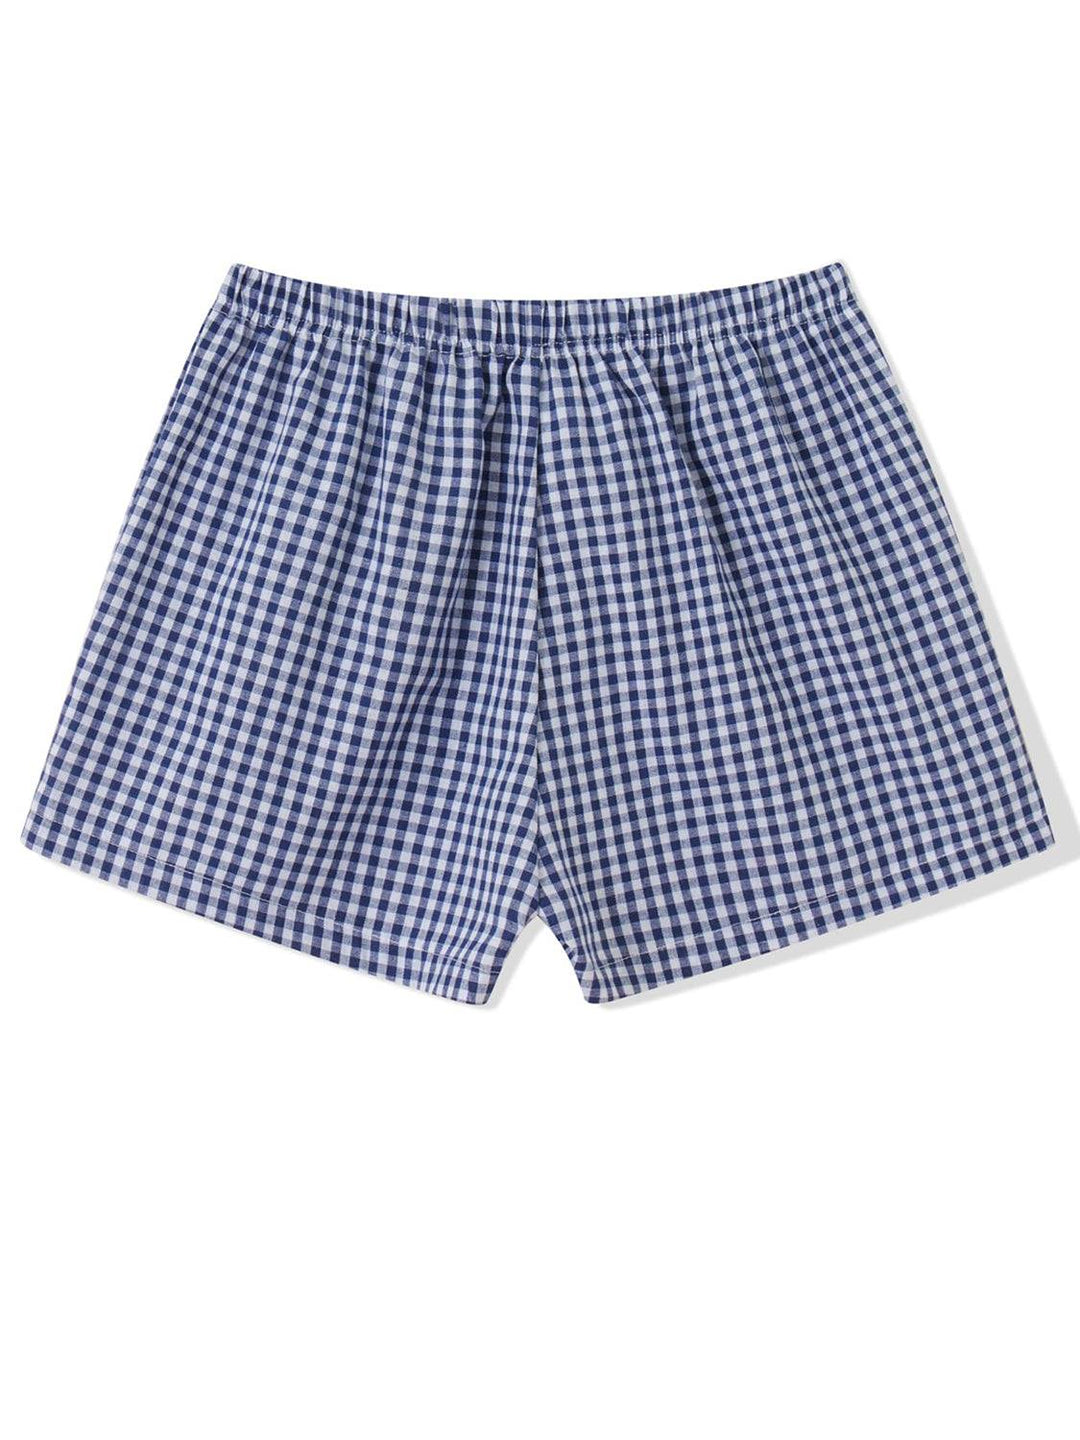 a blue and white checkered boxers with a white background